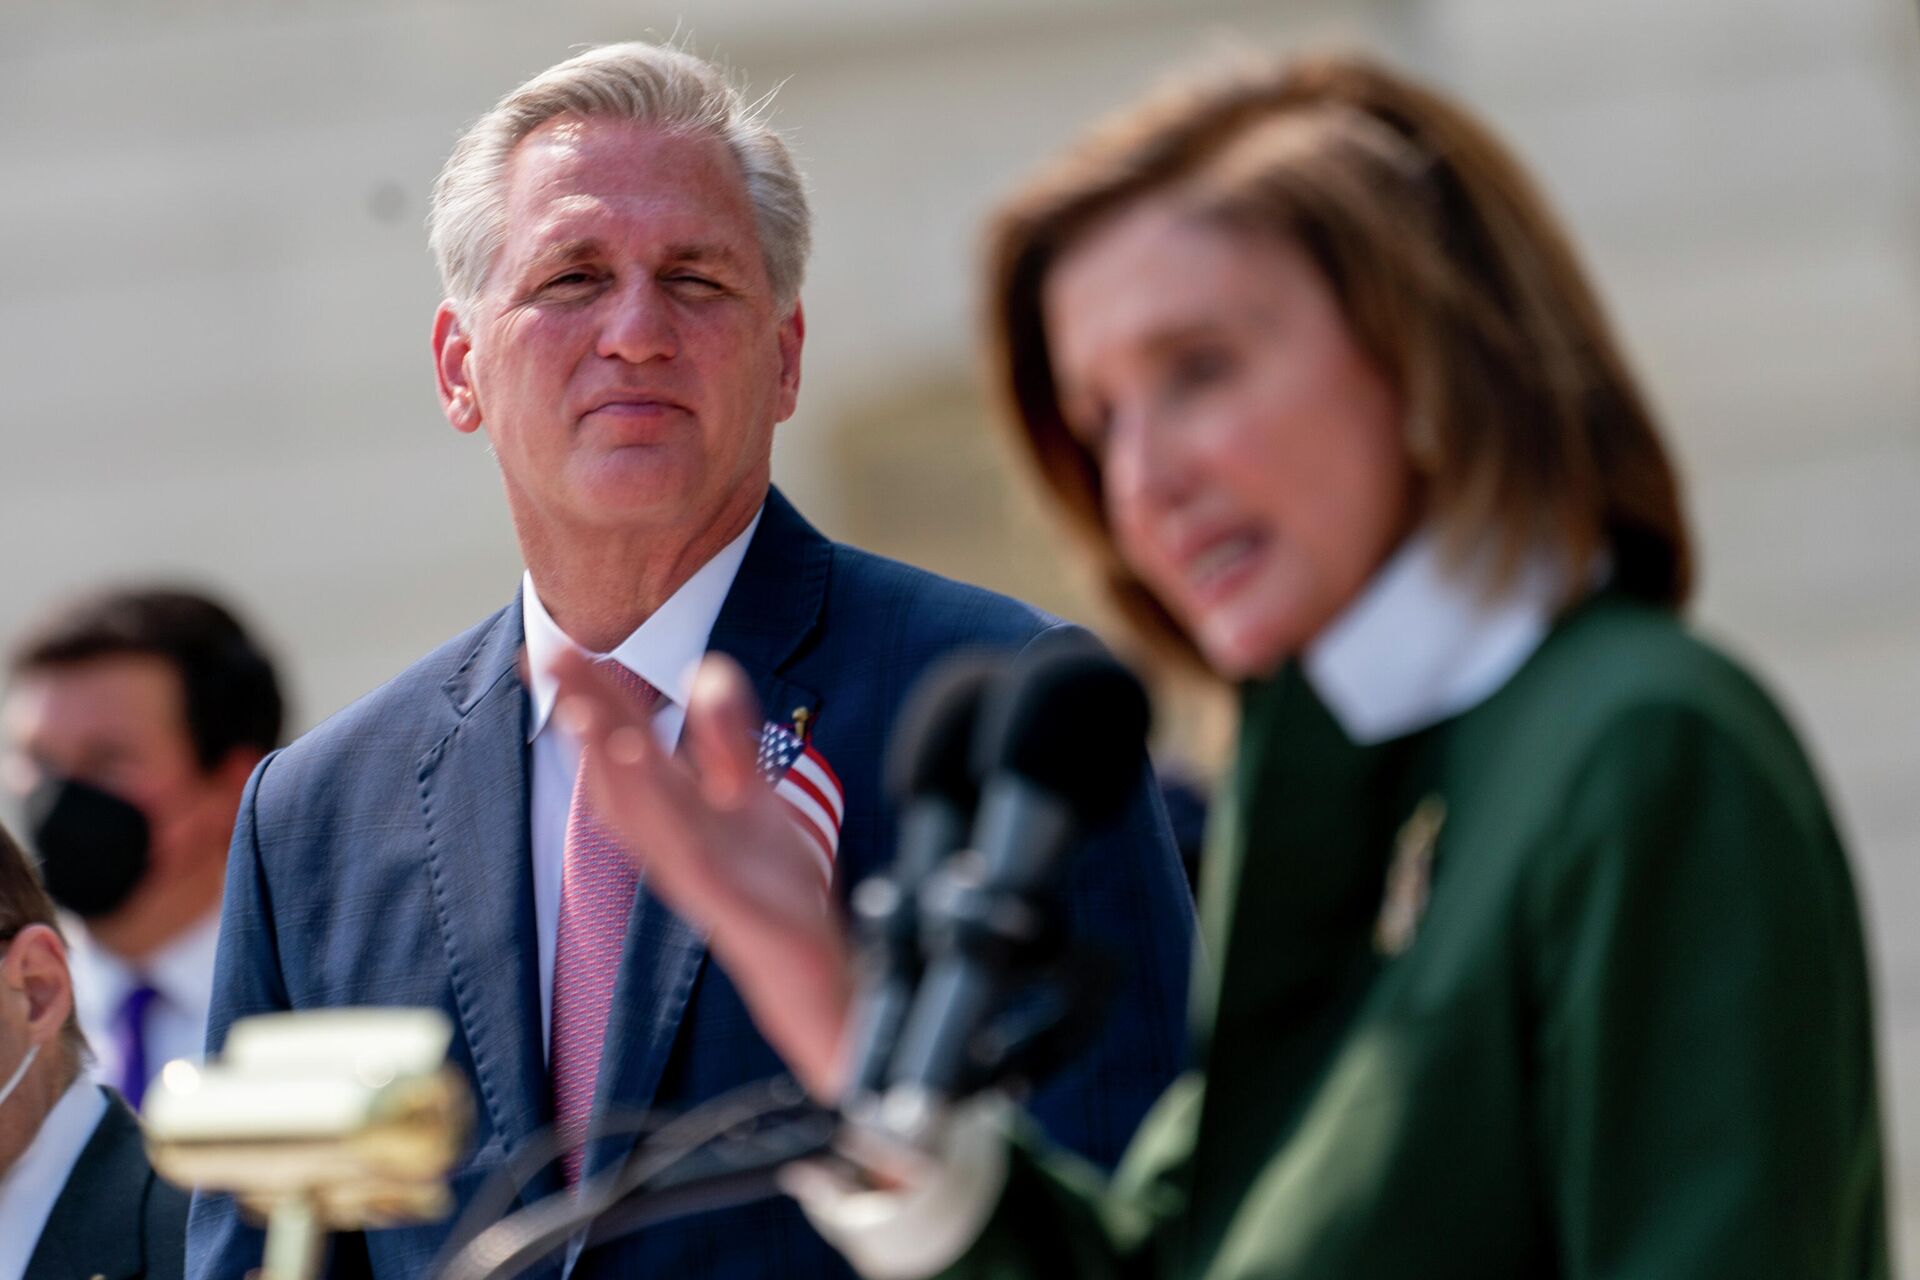 House Speaker Nancy Pelosi of Calif., right, accompanied by House Minority Leader Kevin McCarthy of Calif., left, speaks during a Congressional Remembrance Ceremony marking the 20th anniversary of the Sept. 11, 2001, terrorist attacks, on Capitol Hill in Washington, Monday, Sept. 13, 2021. - Sputnik International, 1920, 21.10.2022